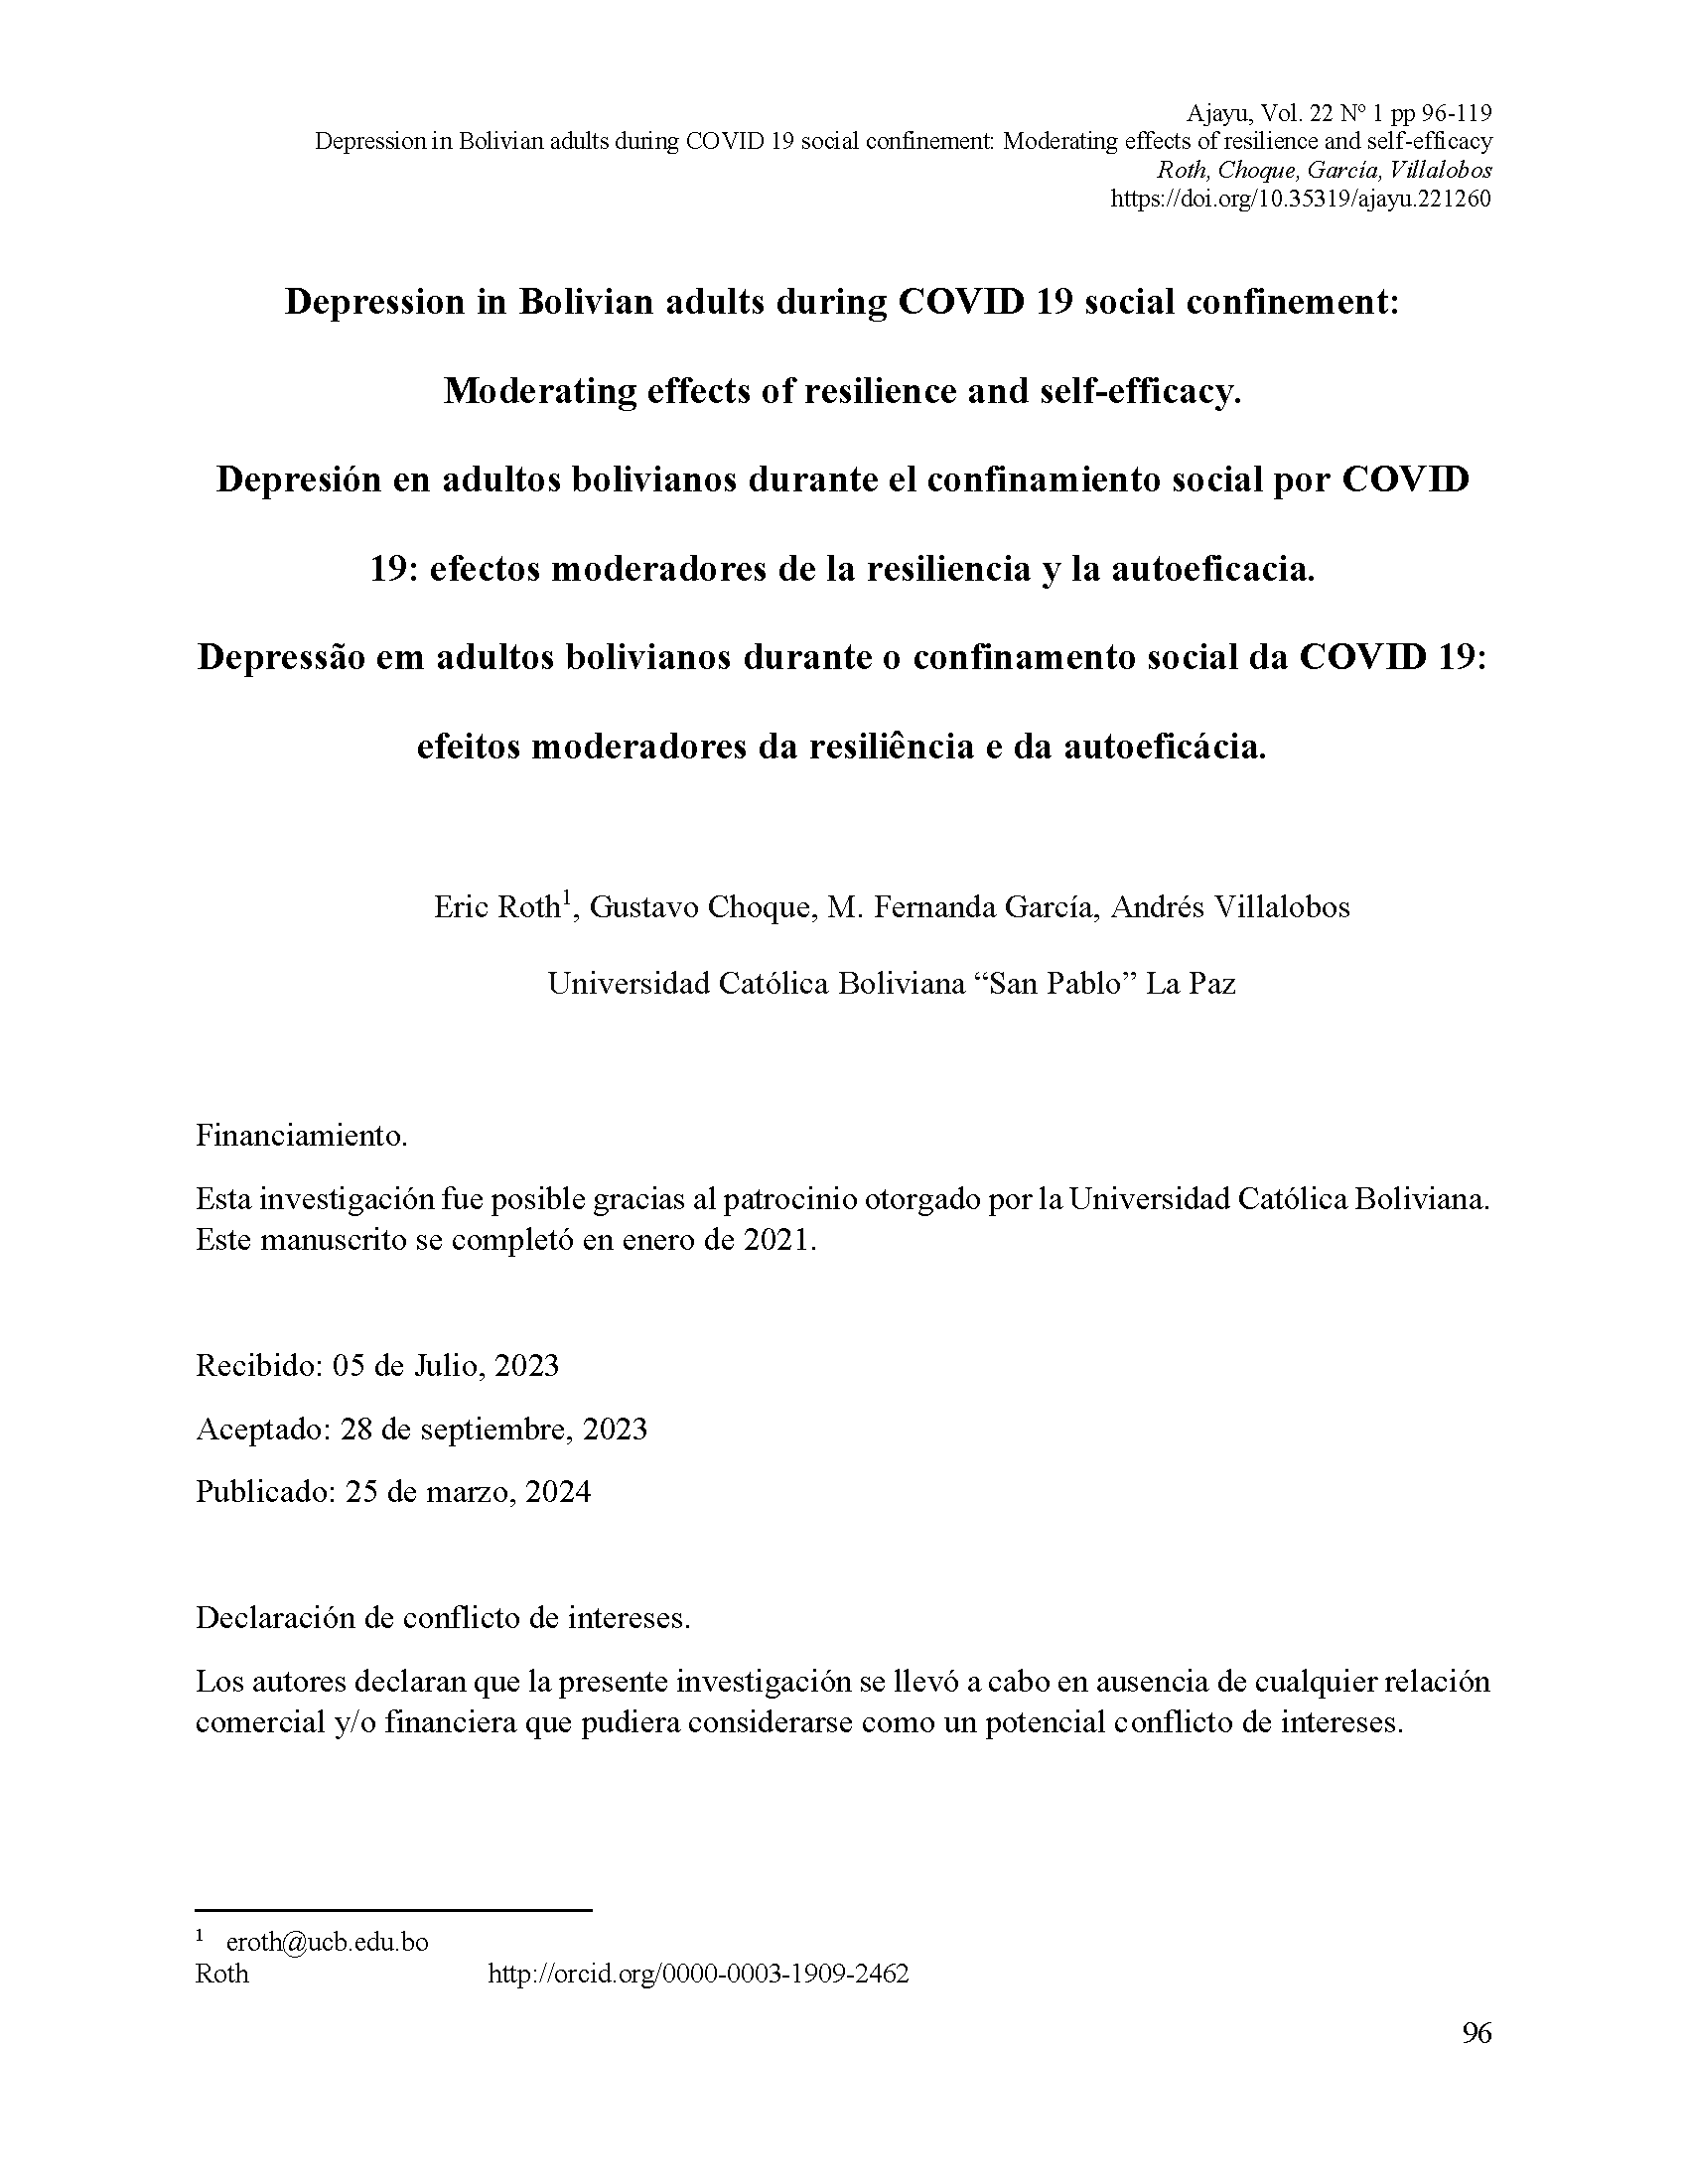 Depression in Bolivian adults during COVID 19 social confinement: Moderating effects of resilience and self-efficacy